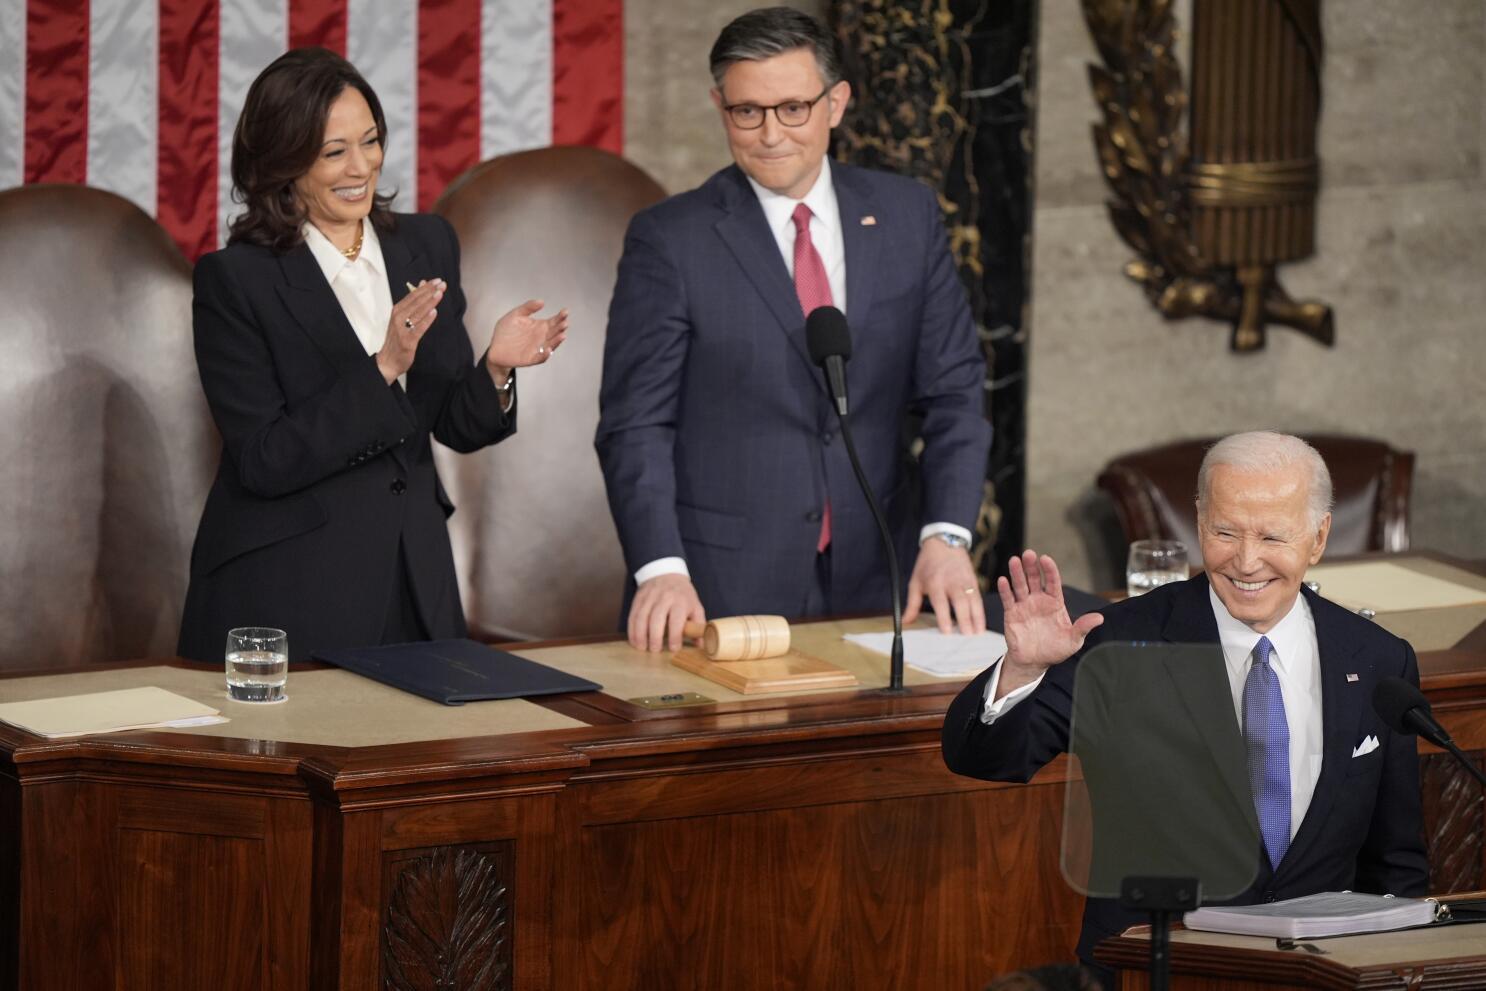 State of the Union Address: Biden Critiques Trump, Sparks Debate on Leadership and Mental Health